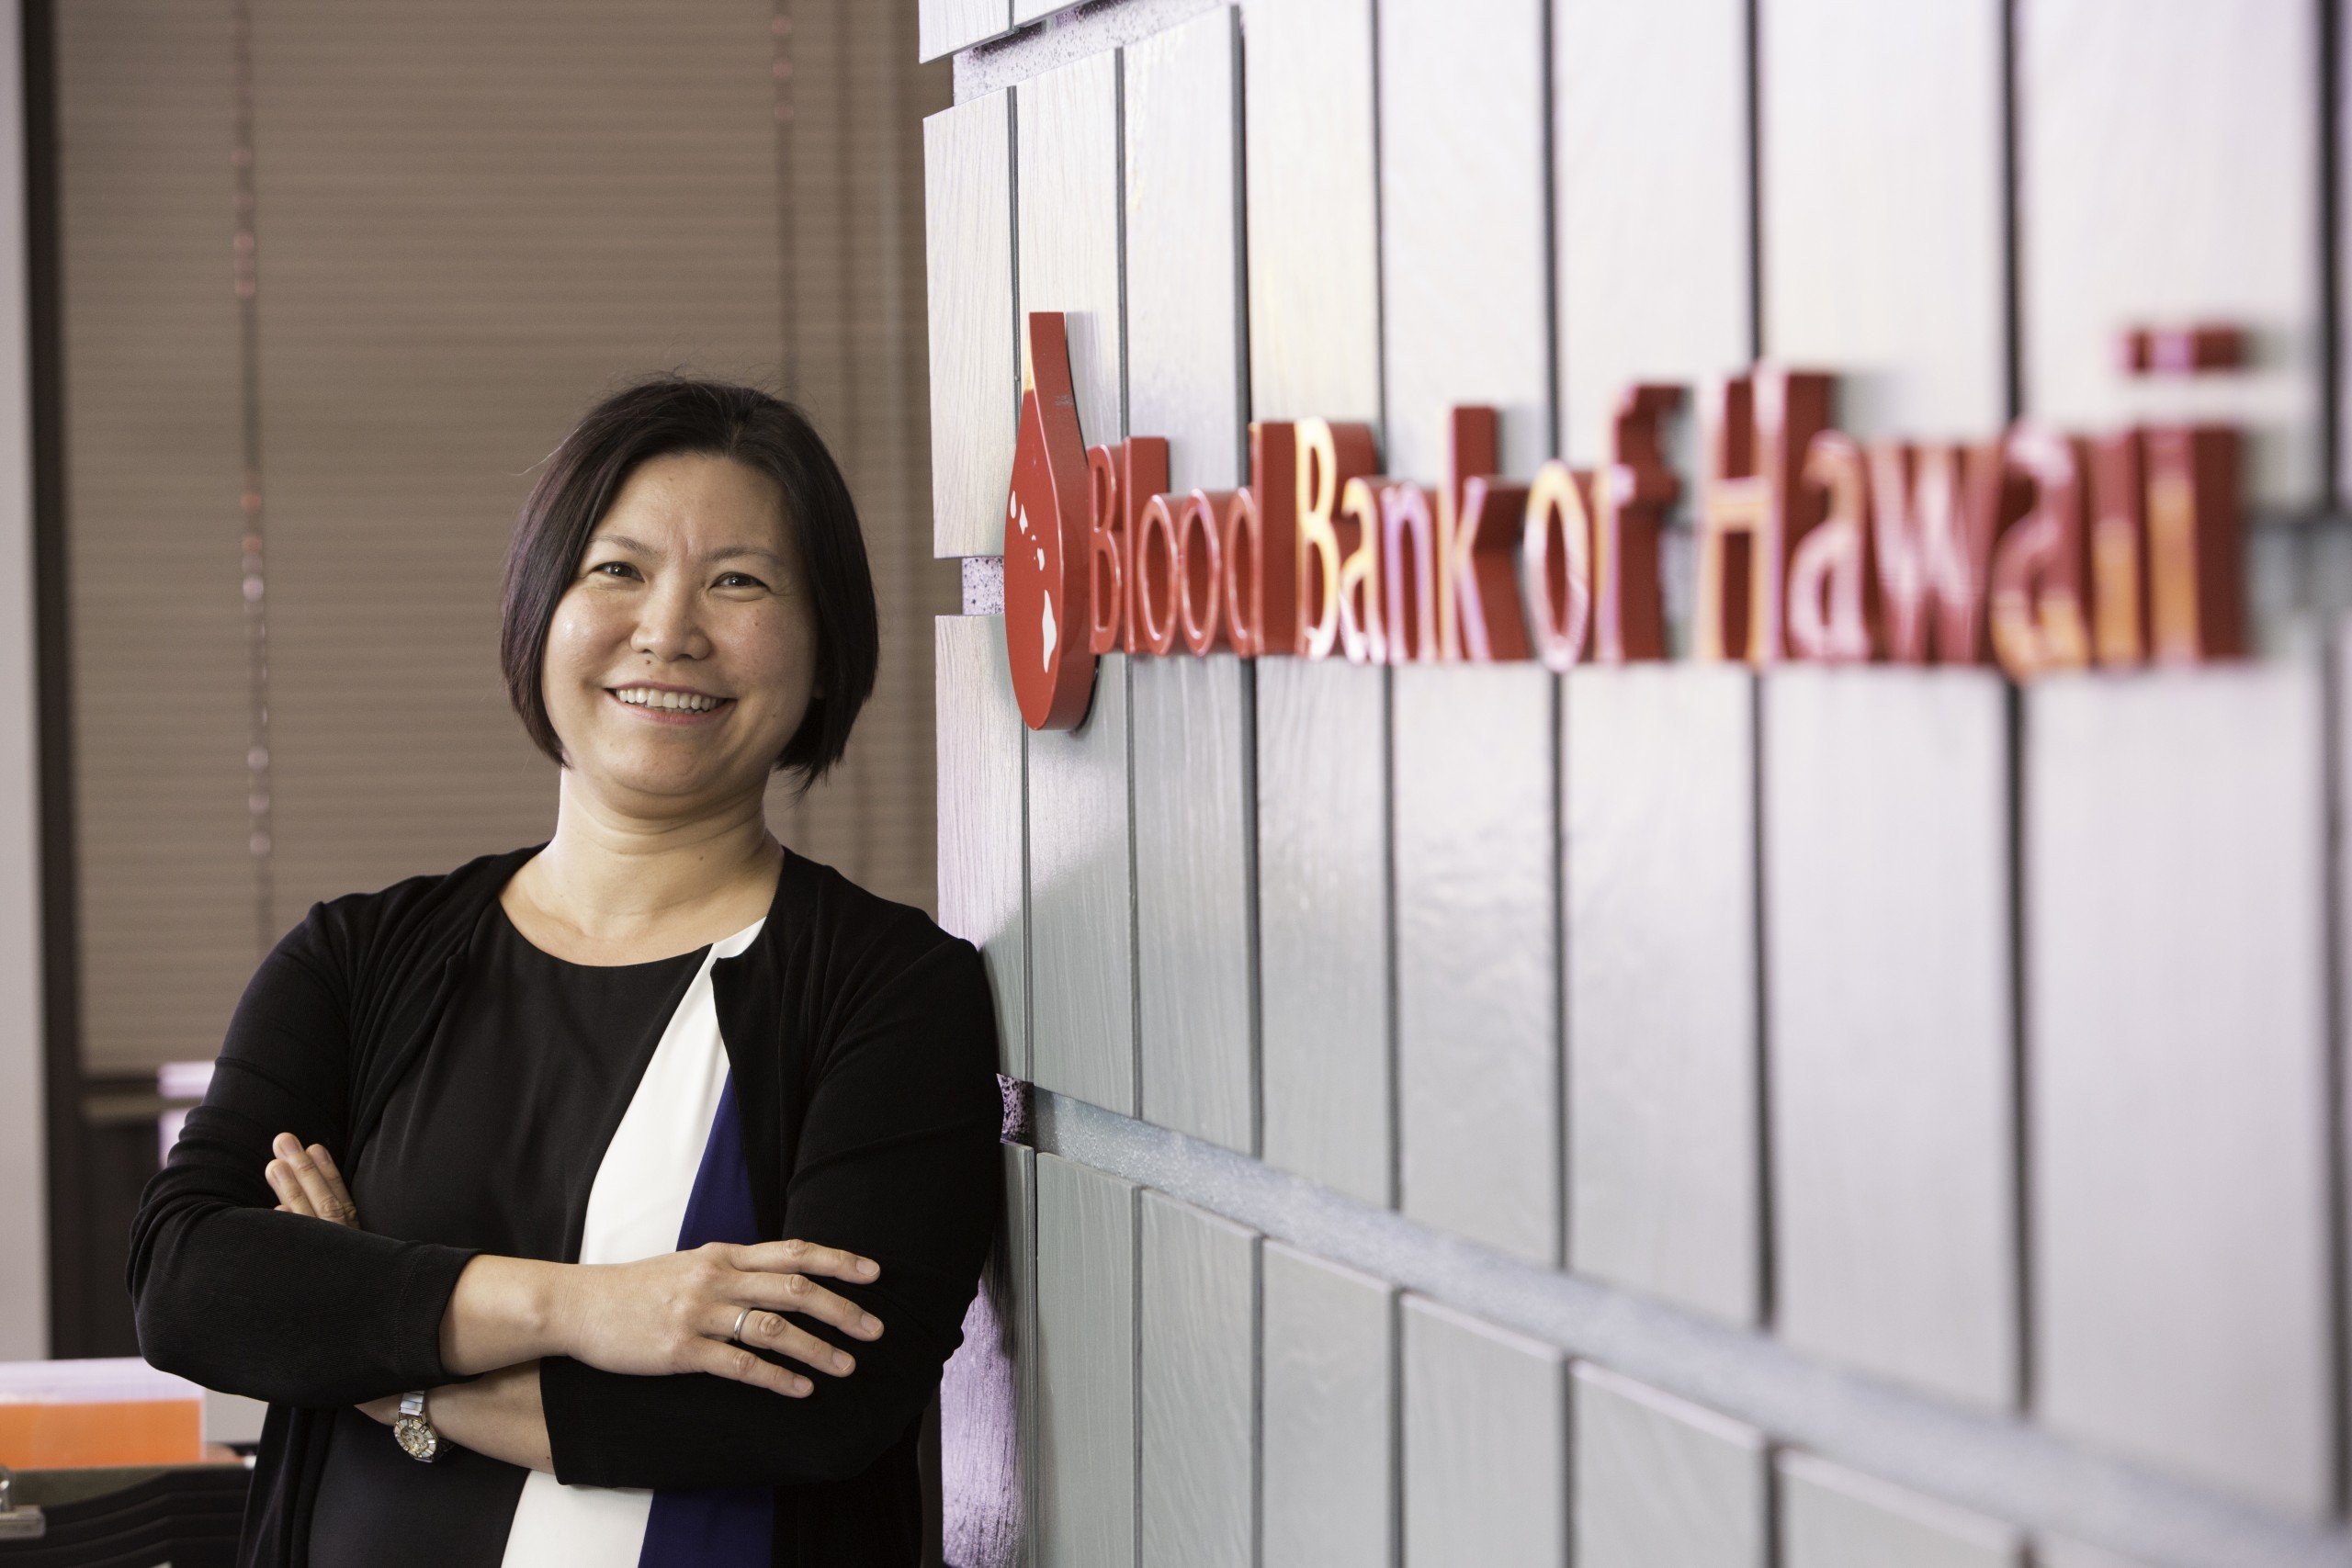 Dr. Kim-Ahn Nguyen has led changes at the Blood Bank while strengthening relationships with its biggest customers: Hawaii’s hospitals. Photo: David Croxford